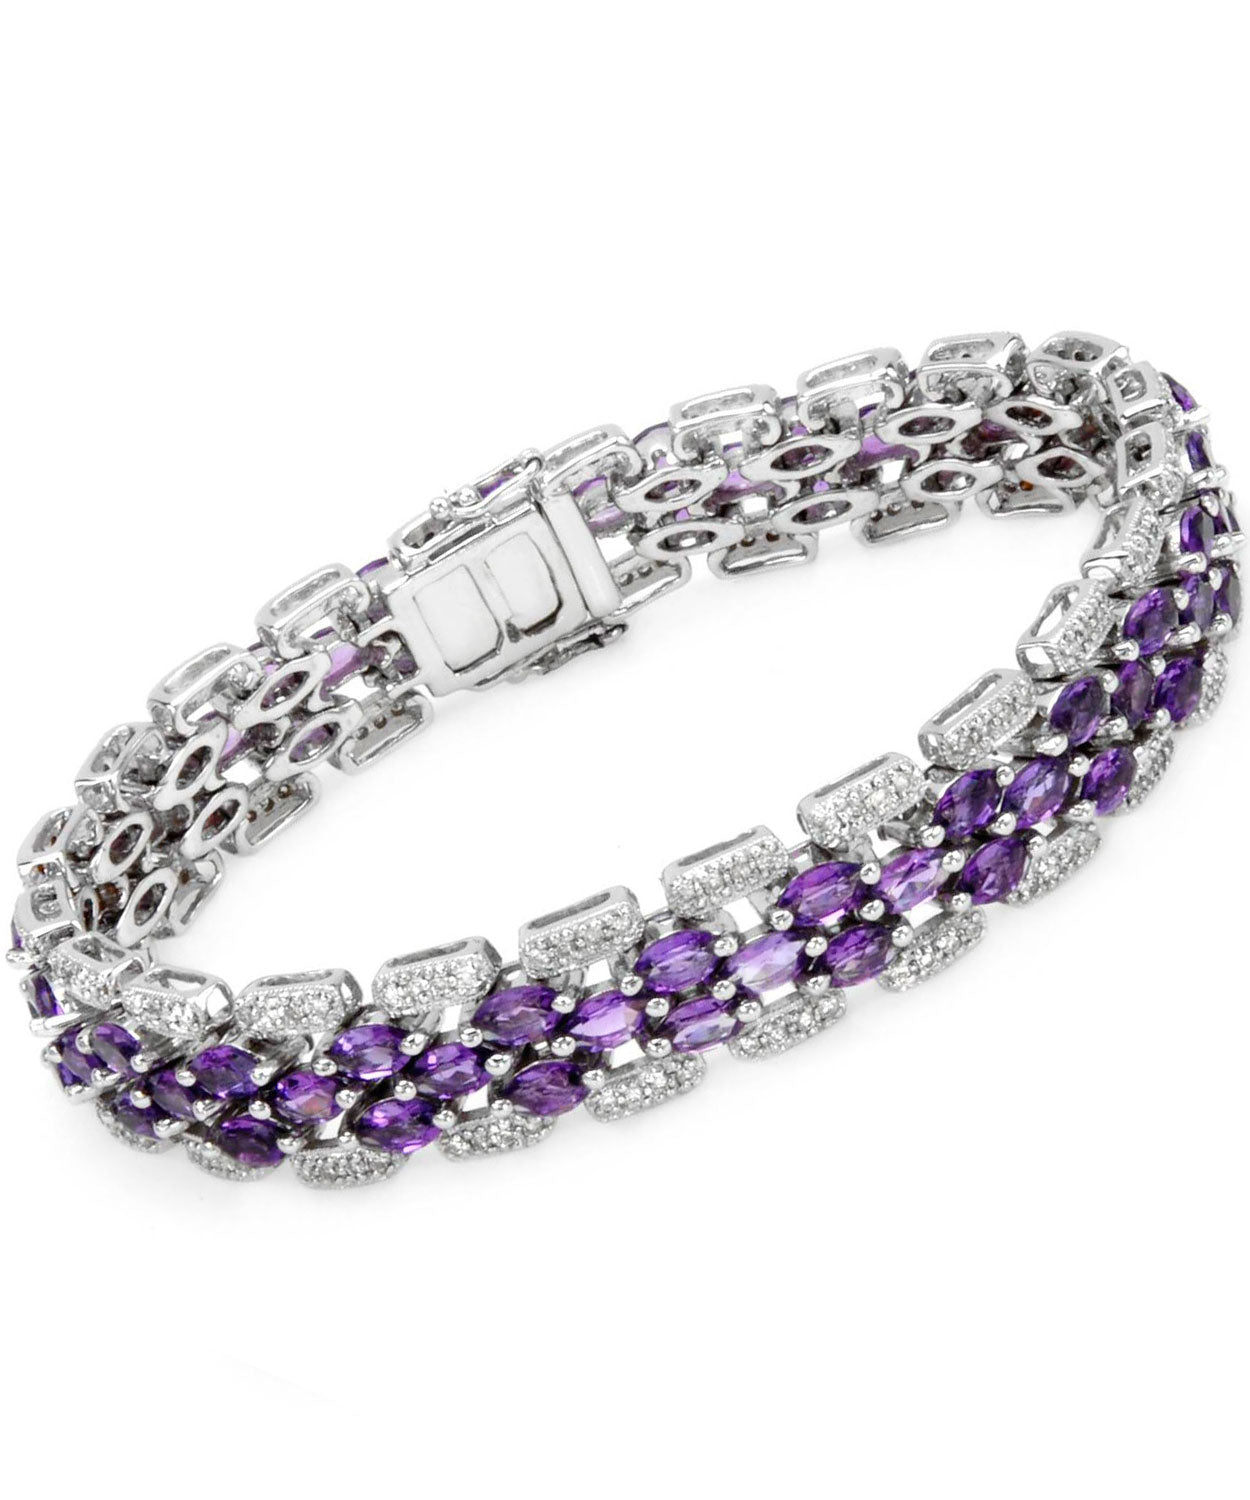 Allure Collection 9.94 ctw Natural Amethyst and Diamond 14k Gold Statement Link Bracelet View 1